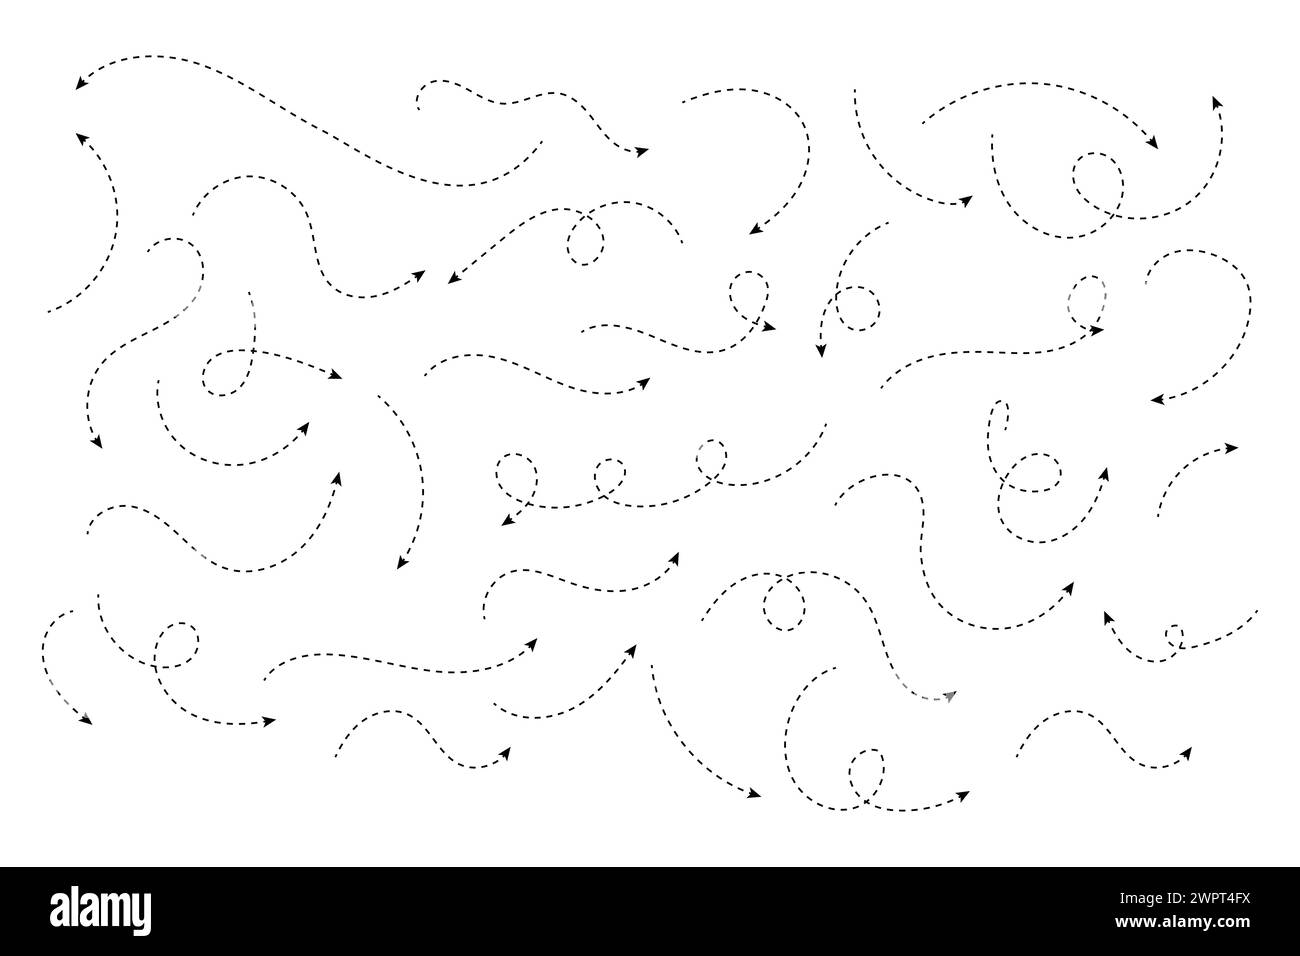 Hand drawn dotted curved line shape vector. Stock Vector